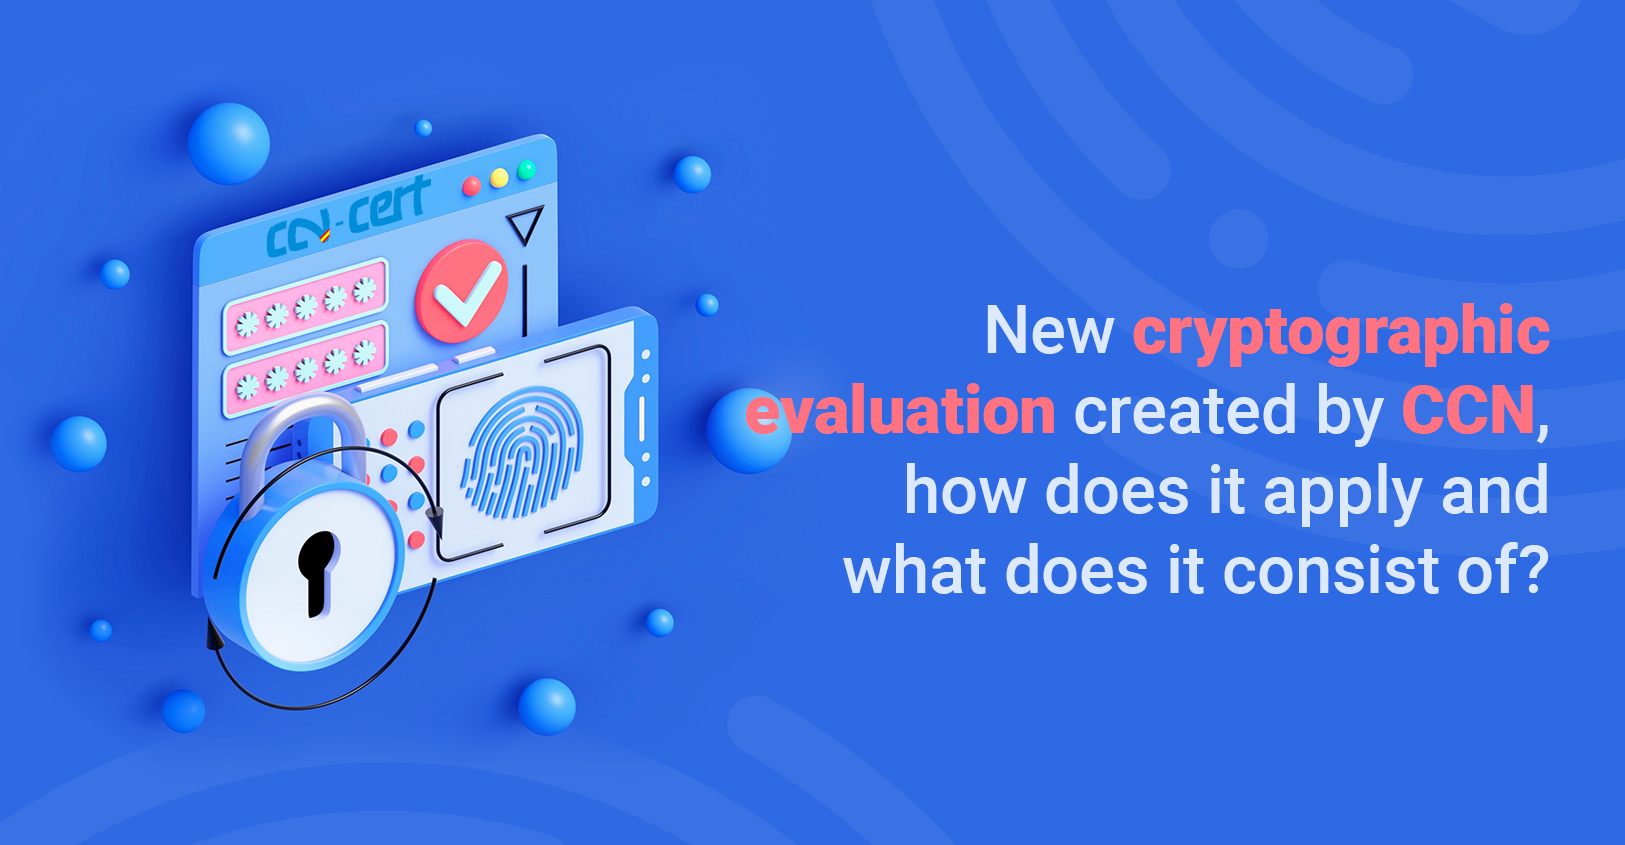 New cryptographic evaluation methodology created by CCN, how does it apply and what does it consist of?